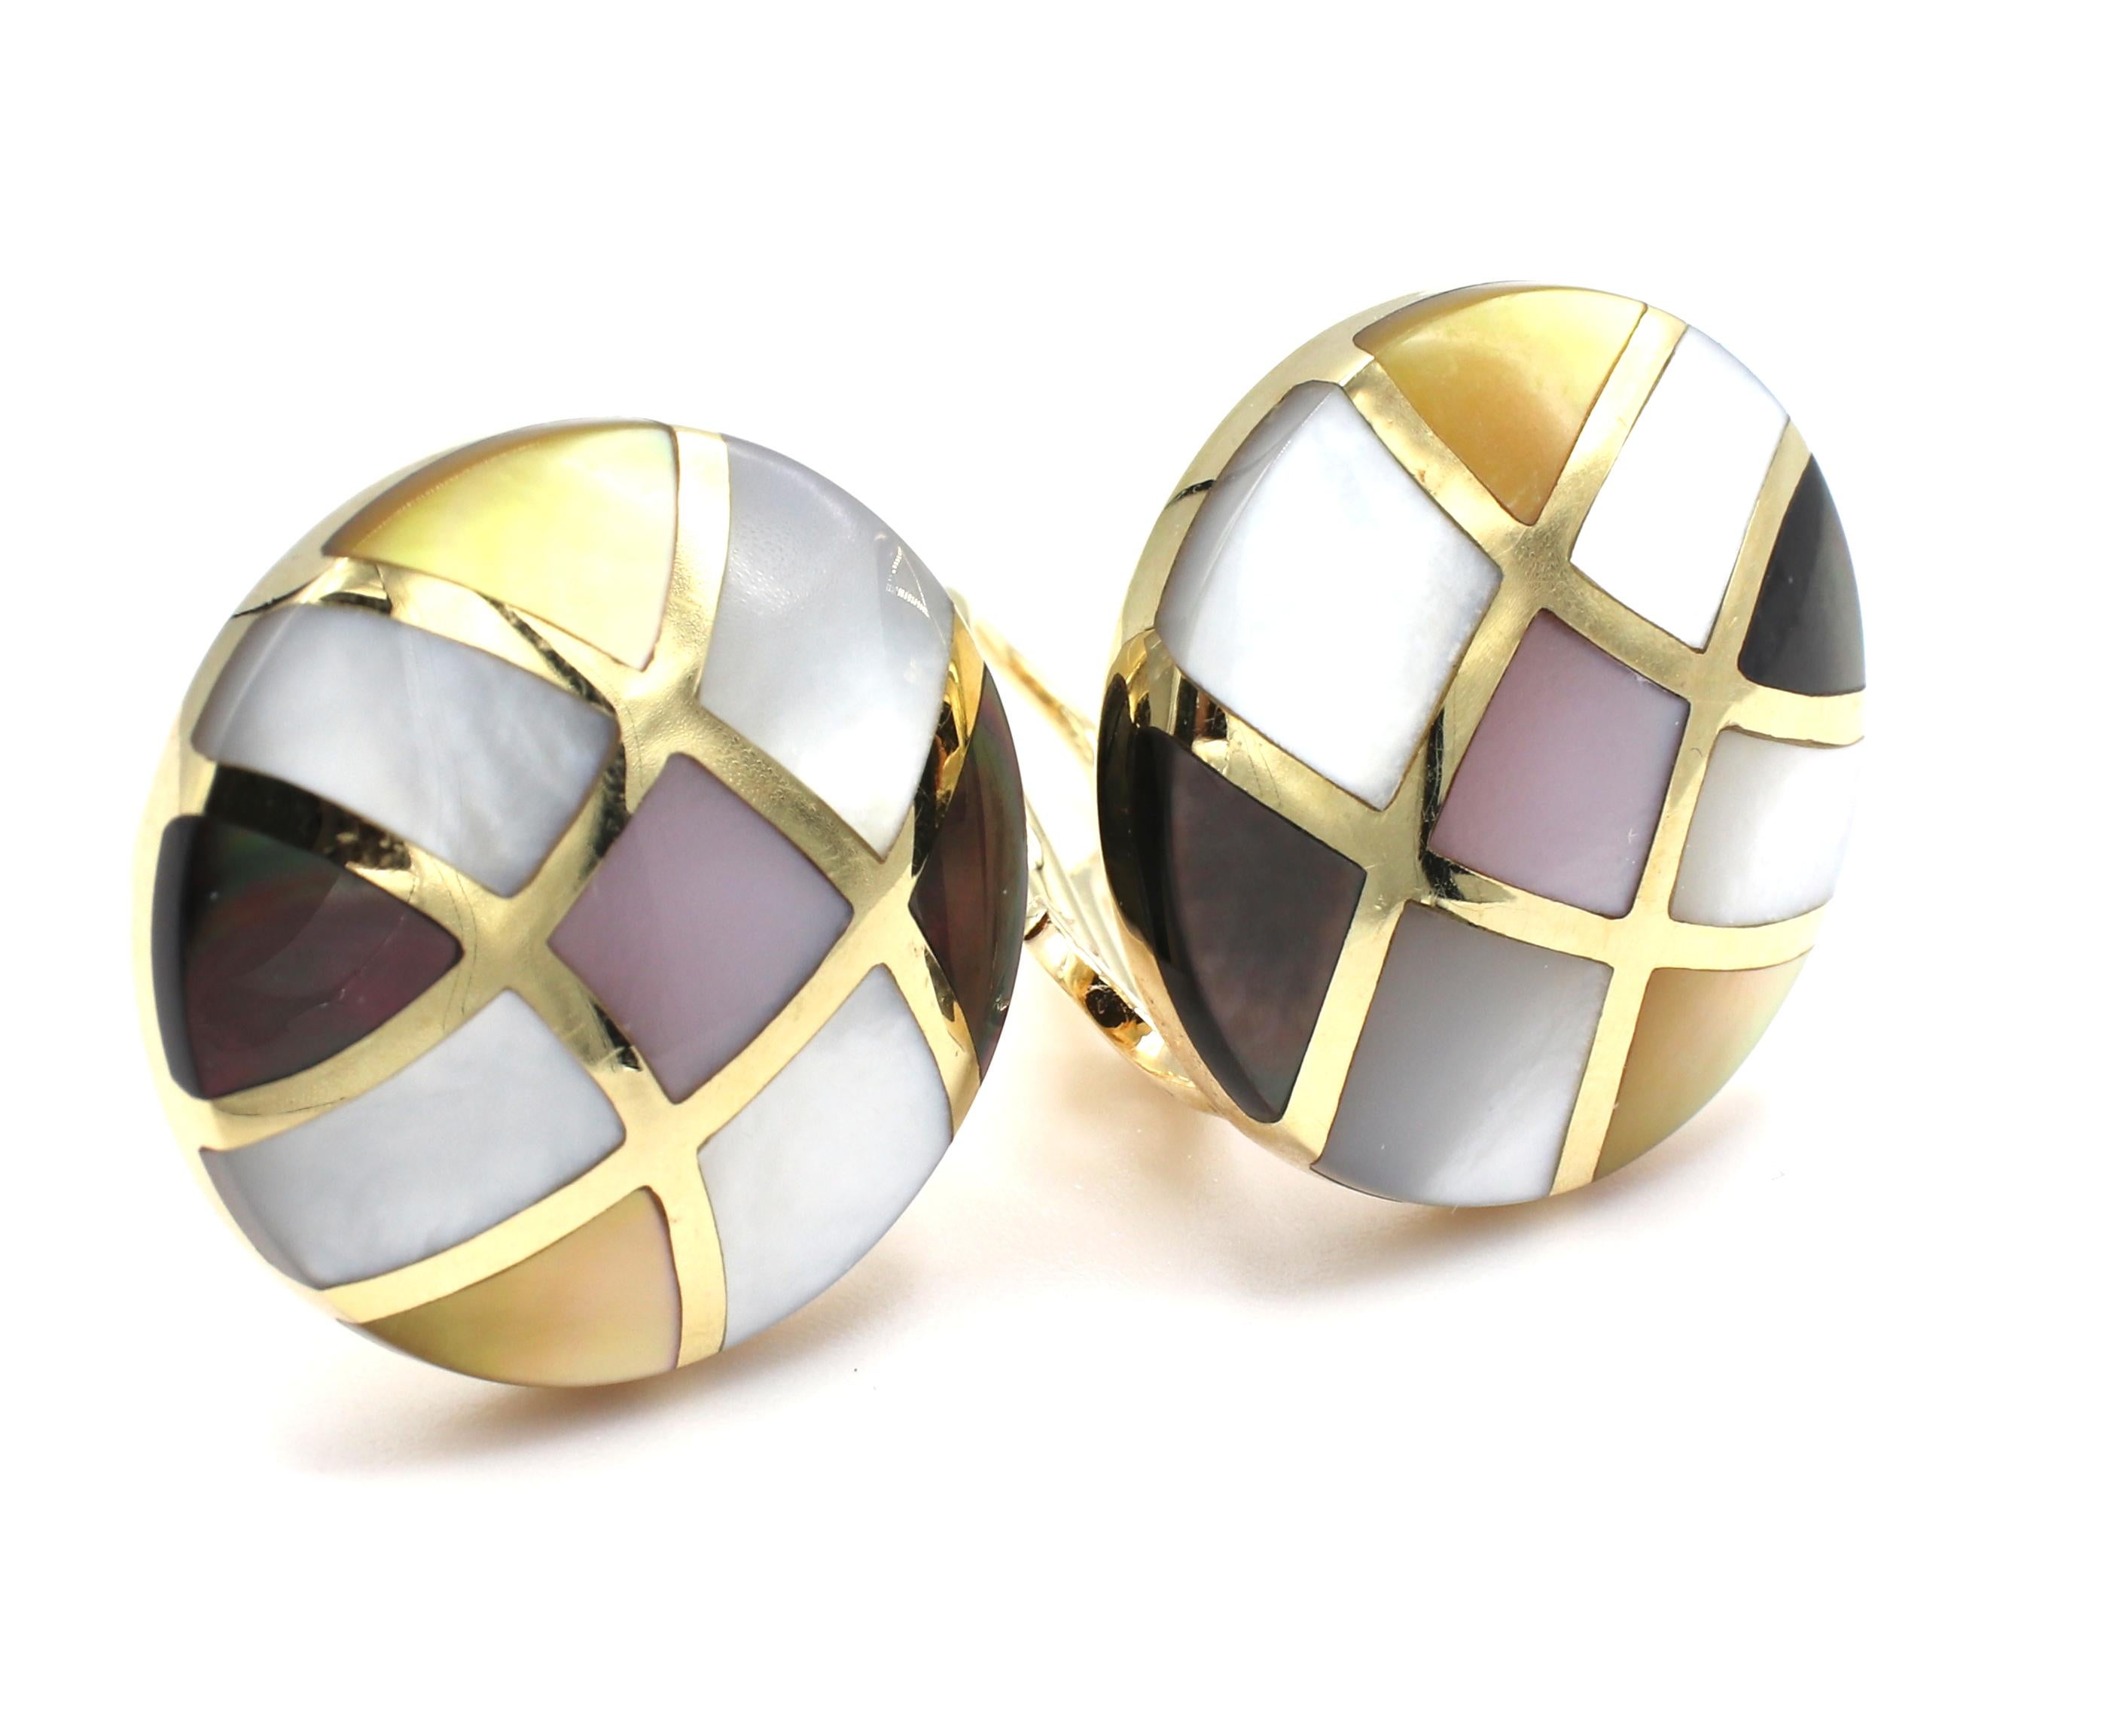 Asch Grossbardt 14 Karat Yellow Gold Mother of Pearl Inlay Button Earrings
Metal: 14k yellow gold
Weight: 12.55 grams
Diameter: 21.5mm
Backs: Levere backs, clip on
